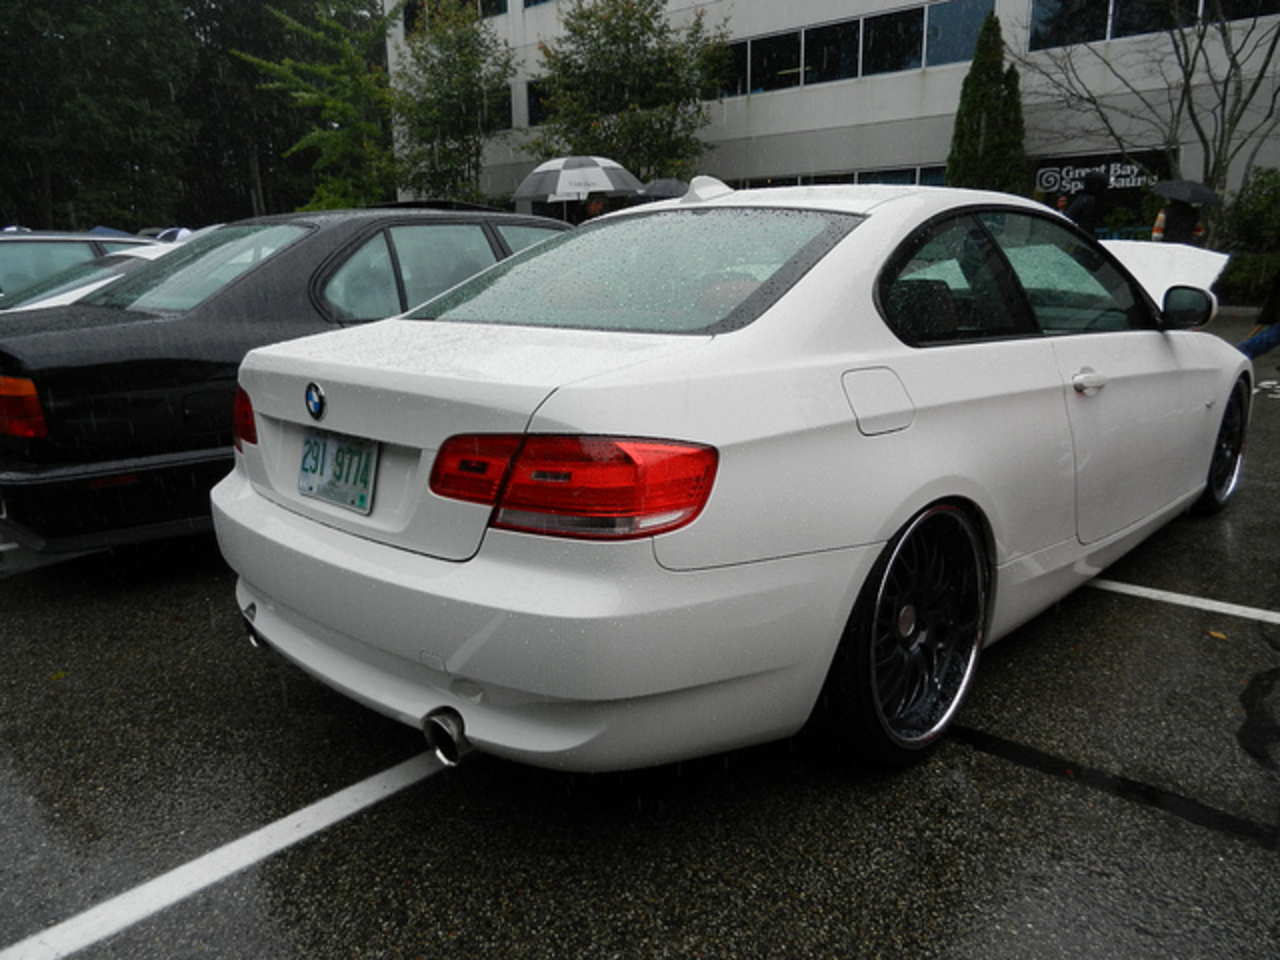 White BMW 335i Coupe with AC Schnitzer parts | Flickr - Photo Sharing!